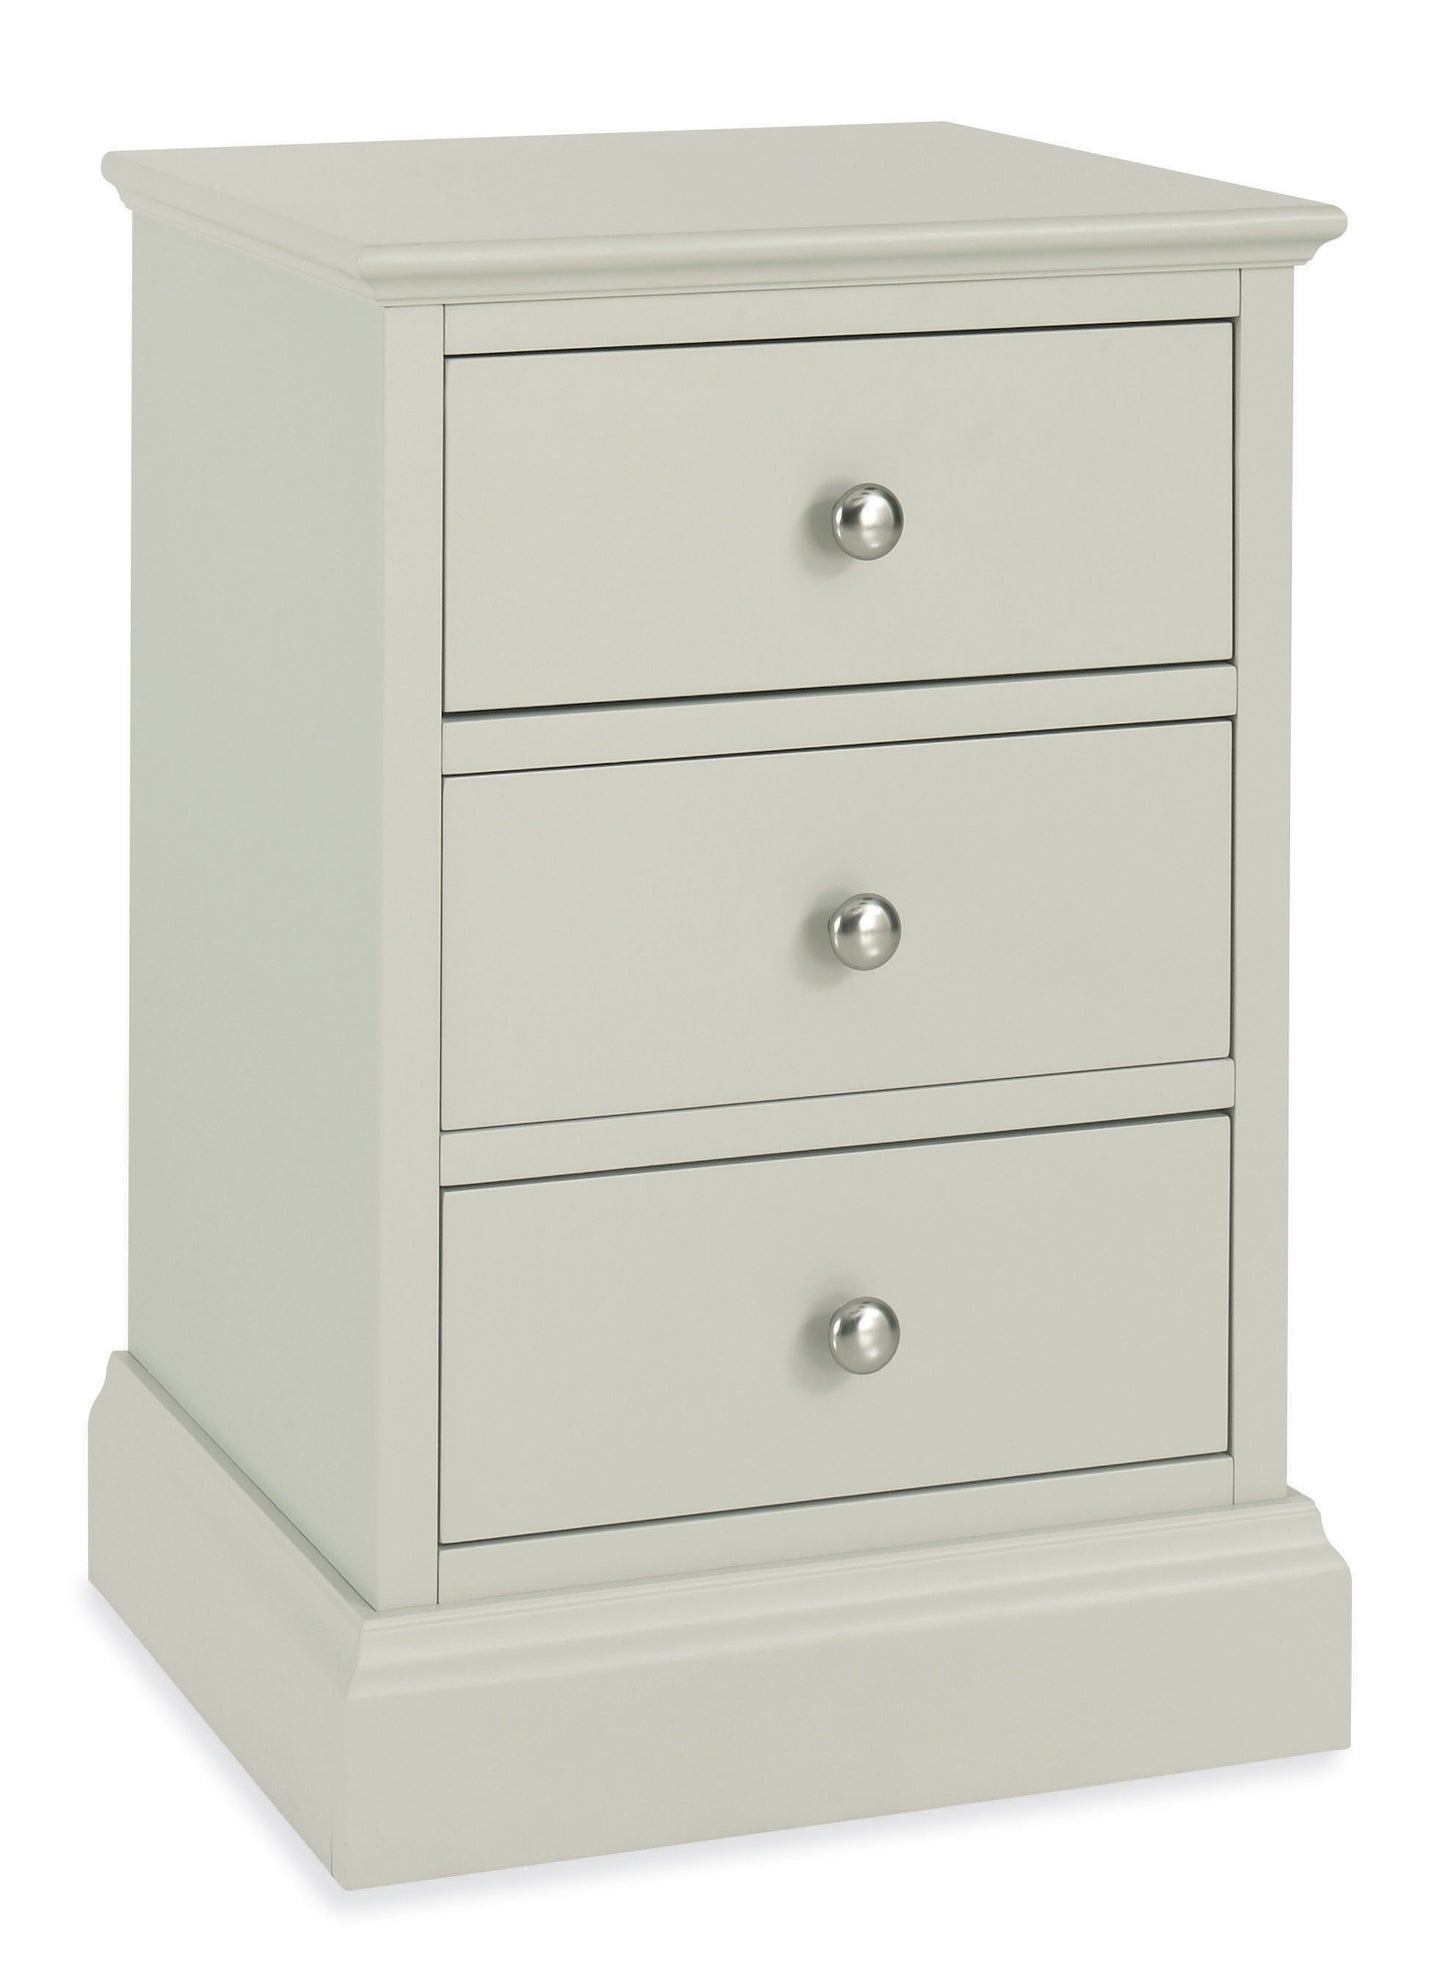 ASHBY COTTON 3 DRAWER NIGHTSTAND